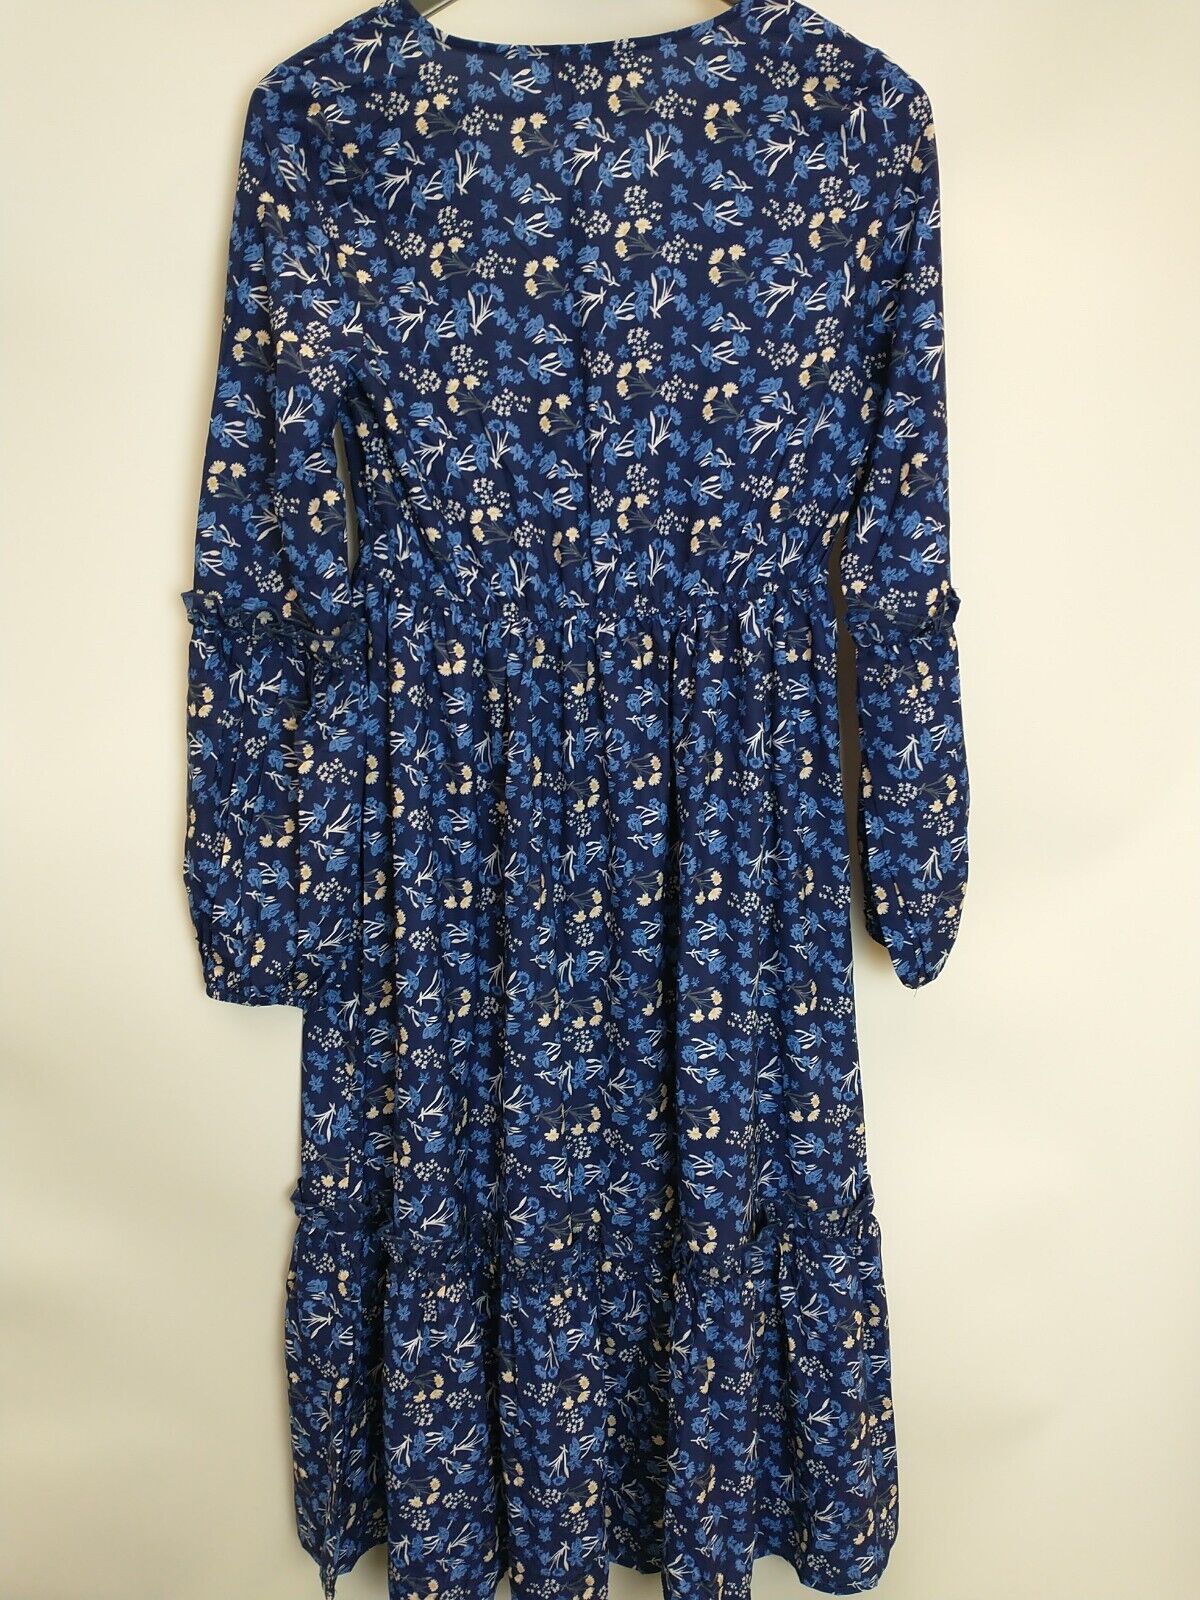 In The Style Jac Jossa Navy Floral Print Tiered Maxi Dress Size UK 6 **** V35